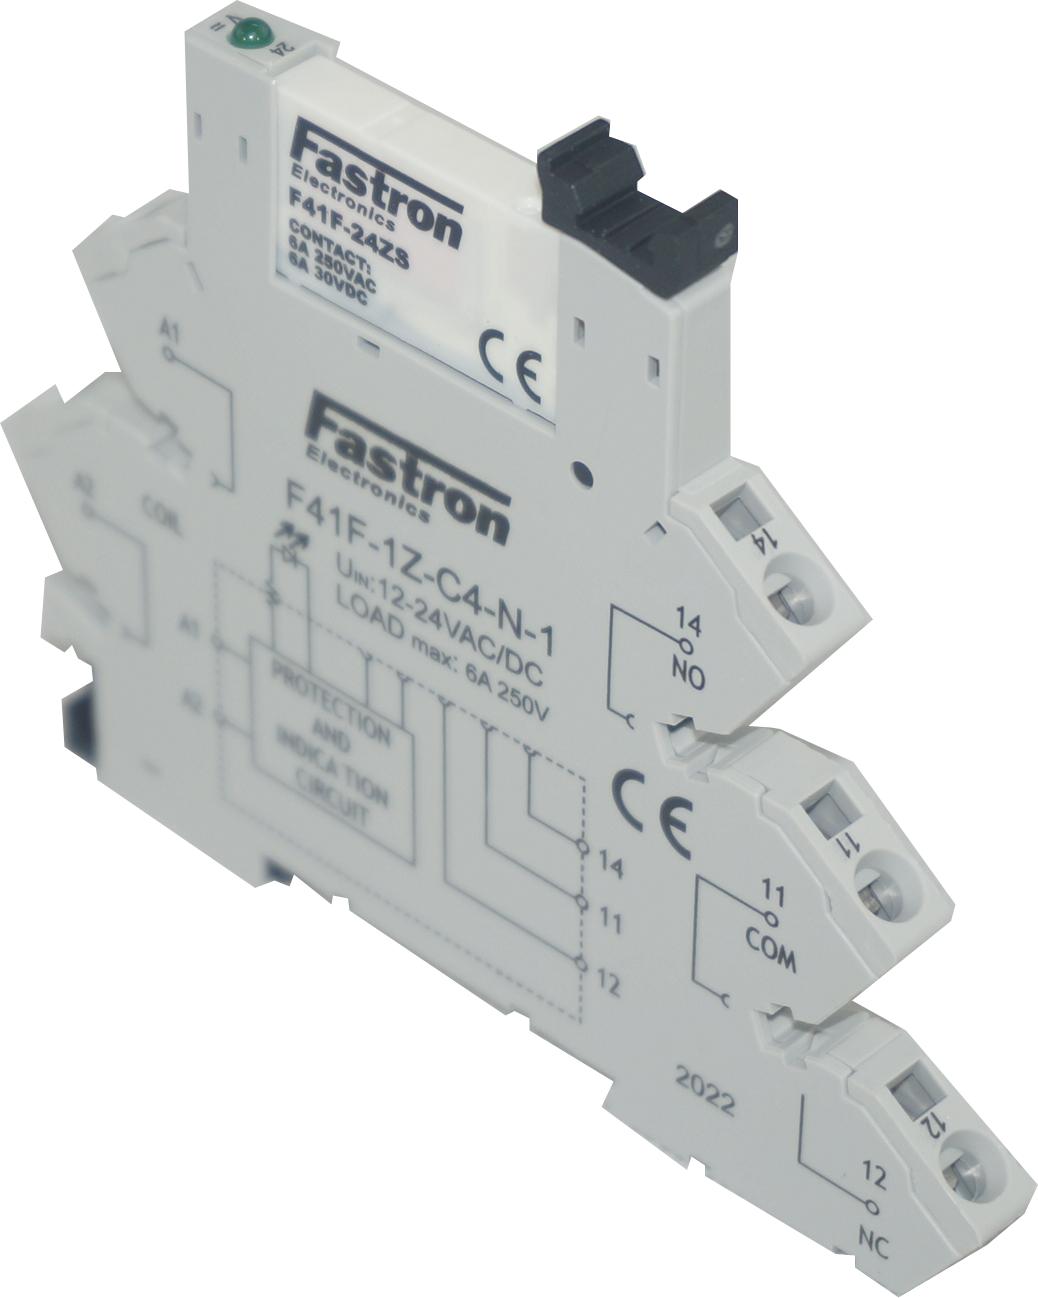 F41F-1Z-C4-1-12/24AC/DC, Slim Relay & Socket with Spring Terminals 12-24VAC/DC Input, 6 Amp @ 30VDC/250VAC-Relay Slimline-Fastron Electronics-Fastron Electronics Store